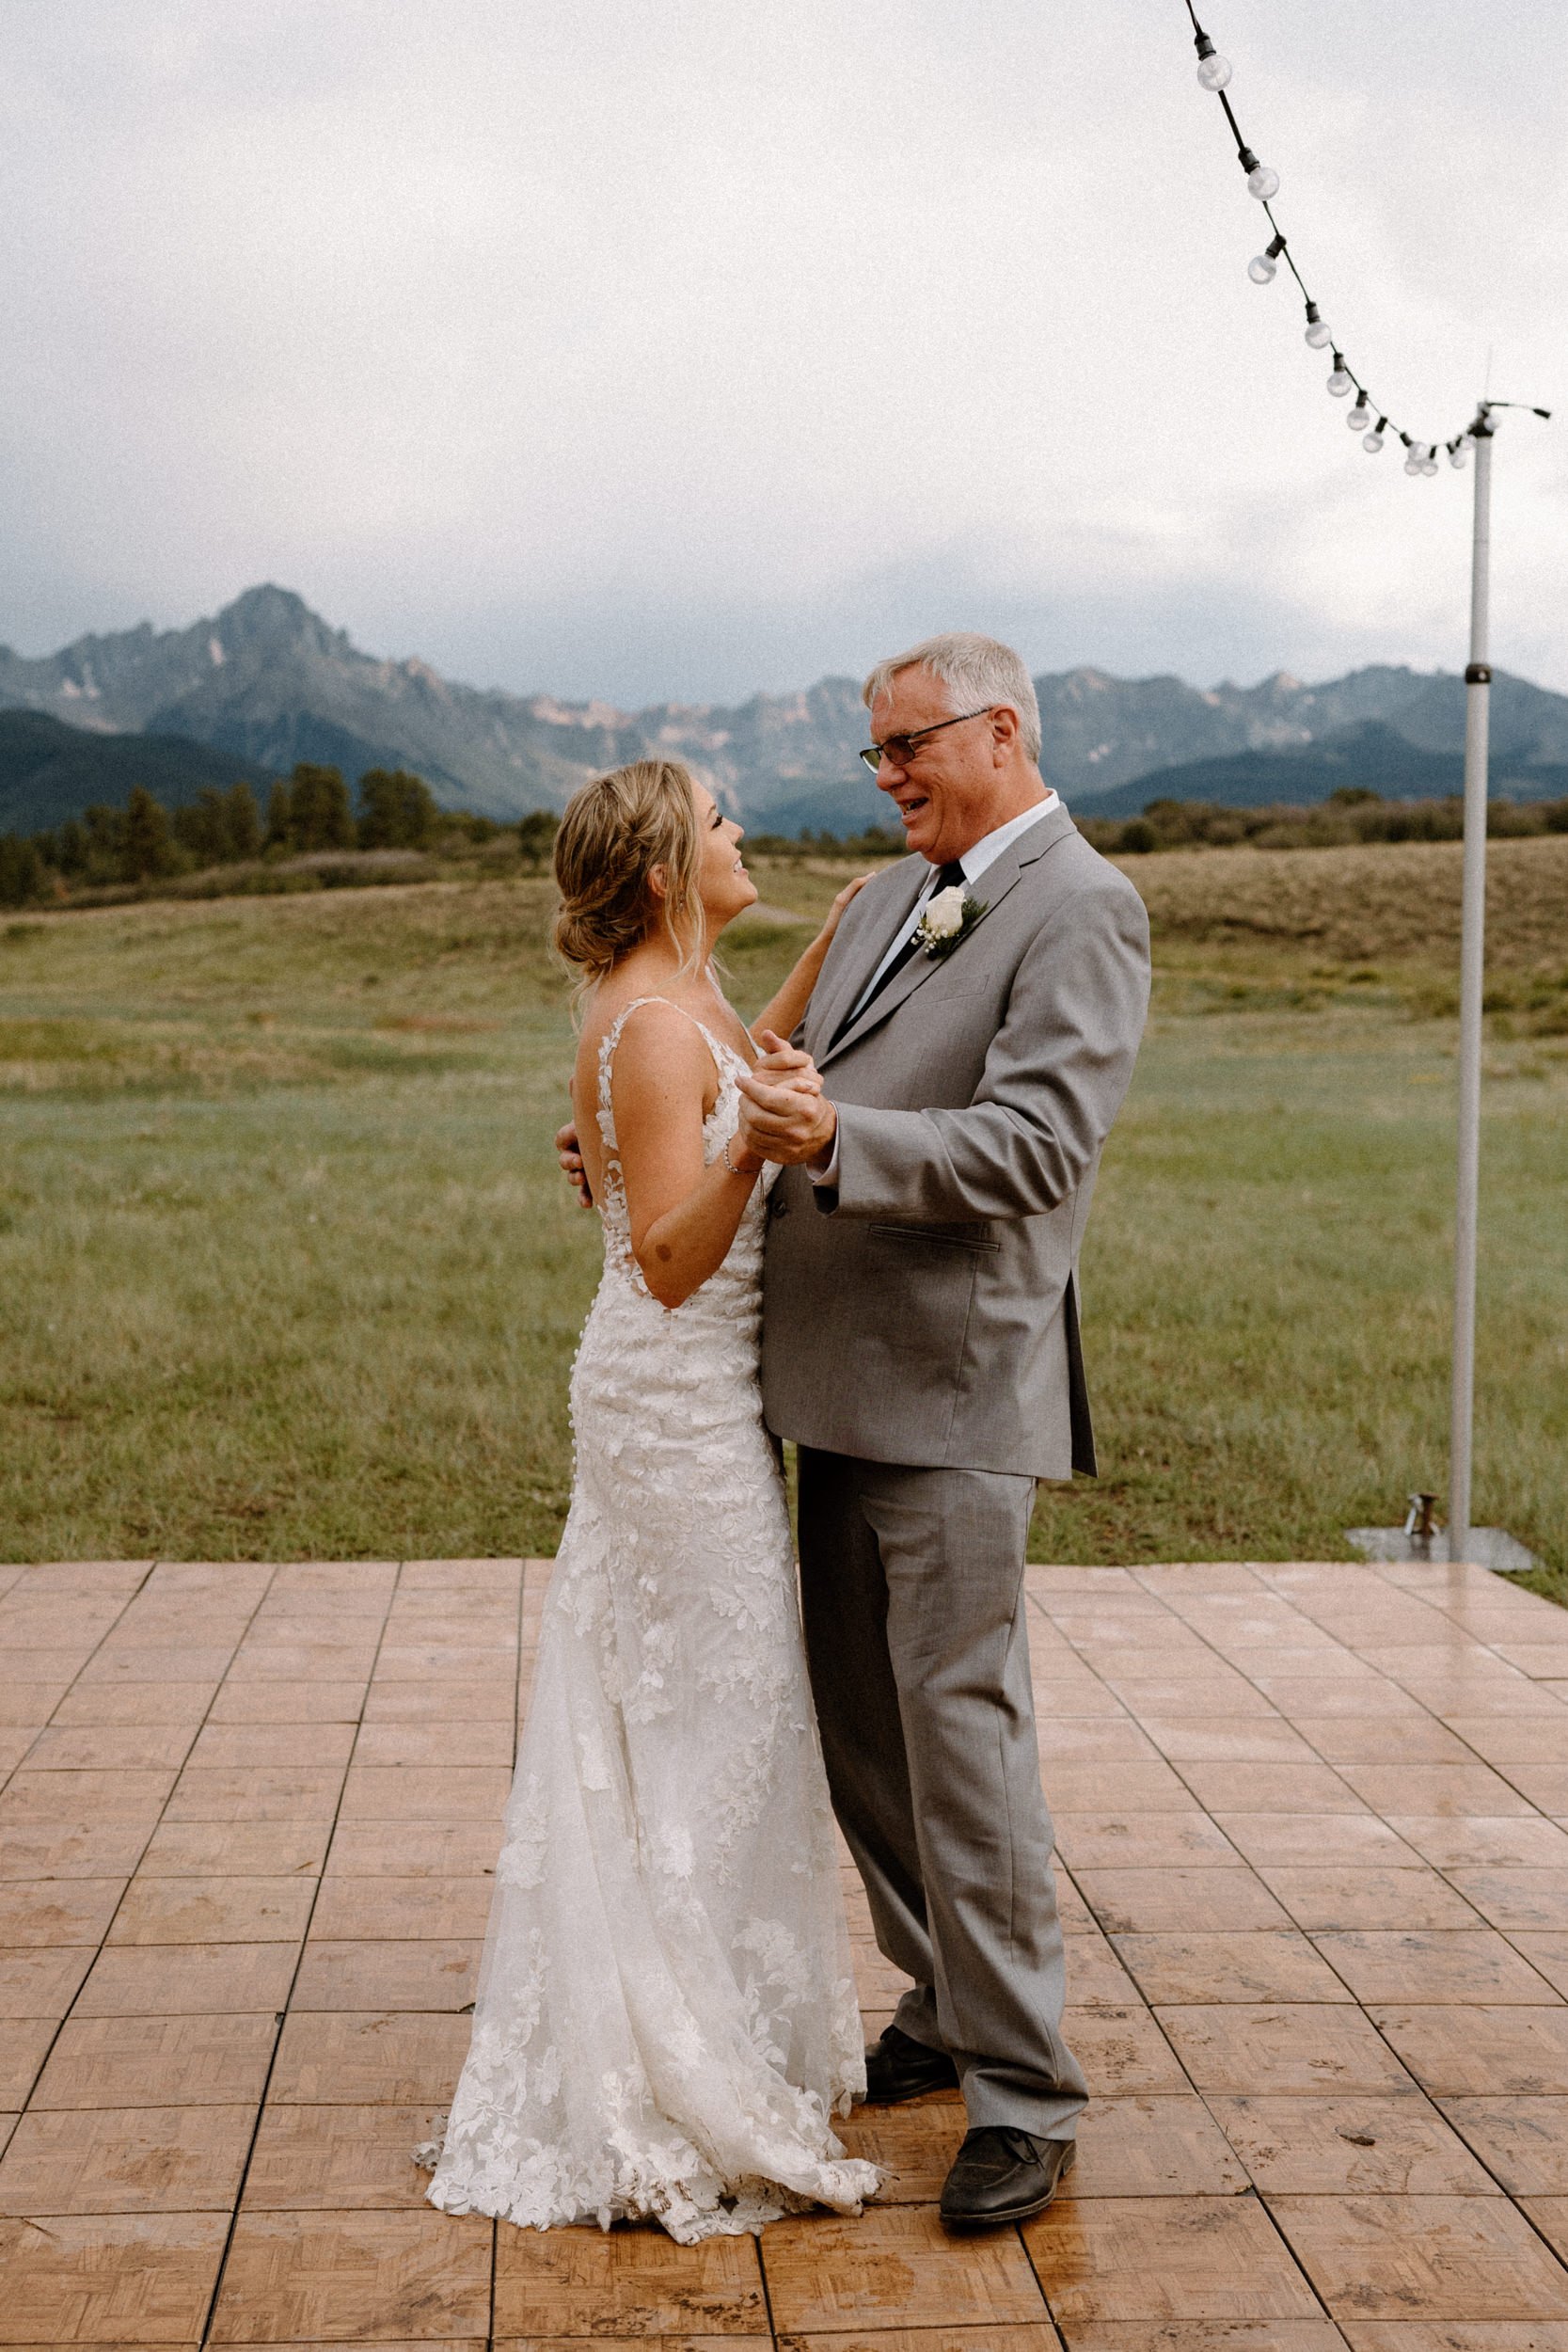 Bride and her father share their father/daughter dance